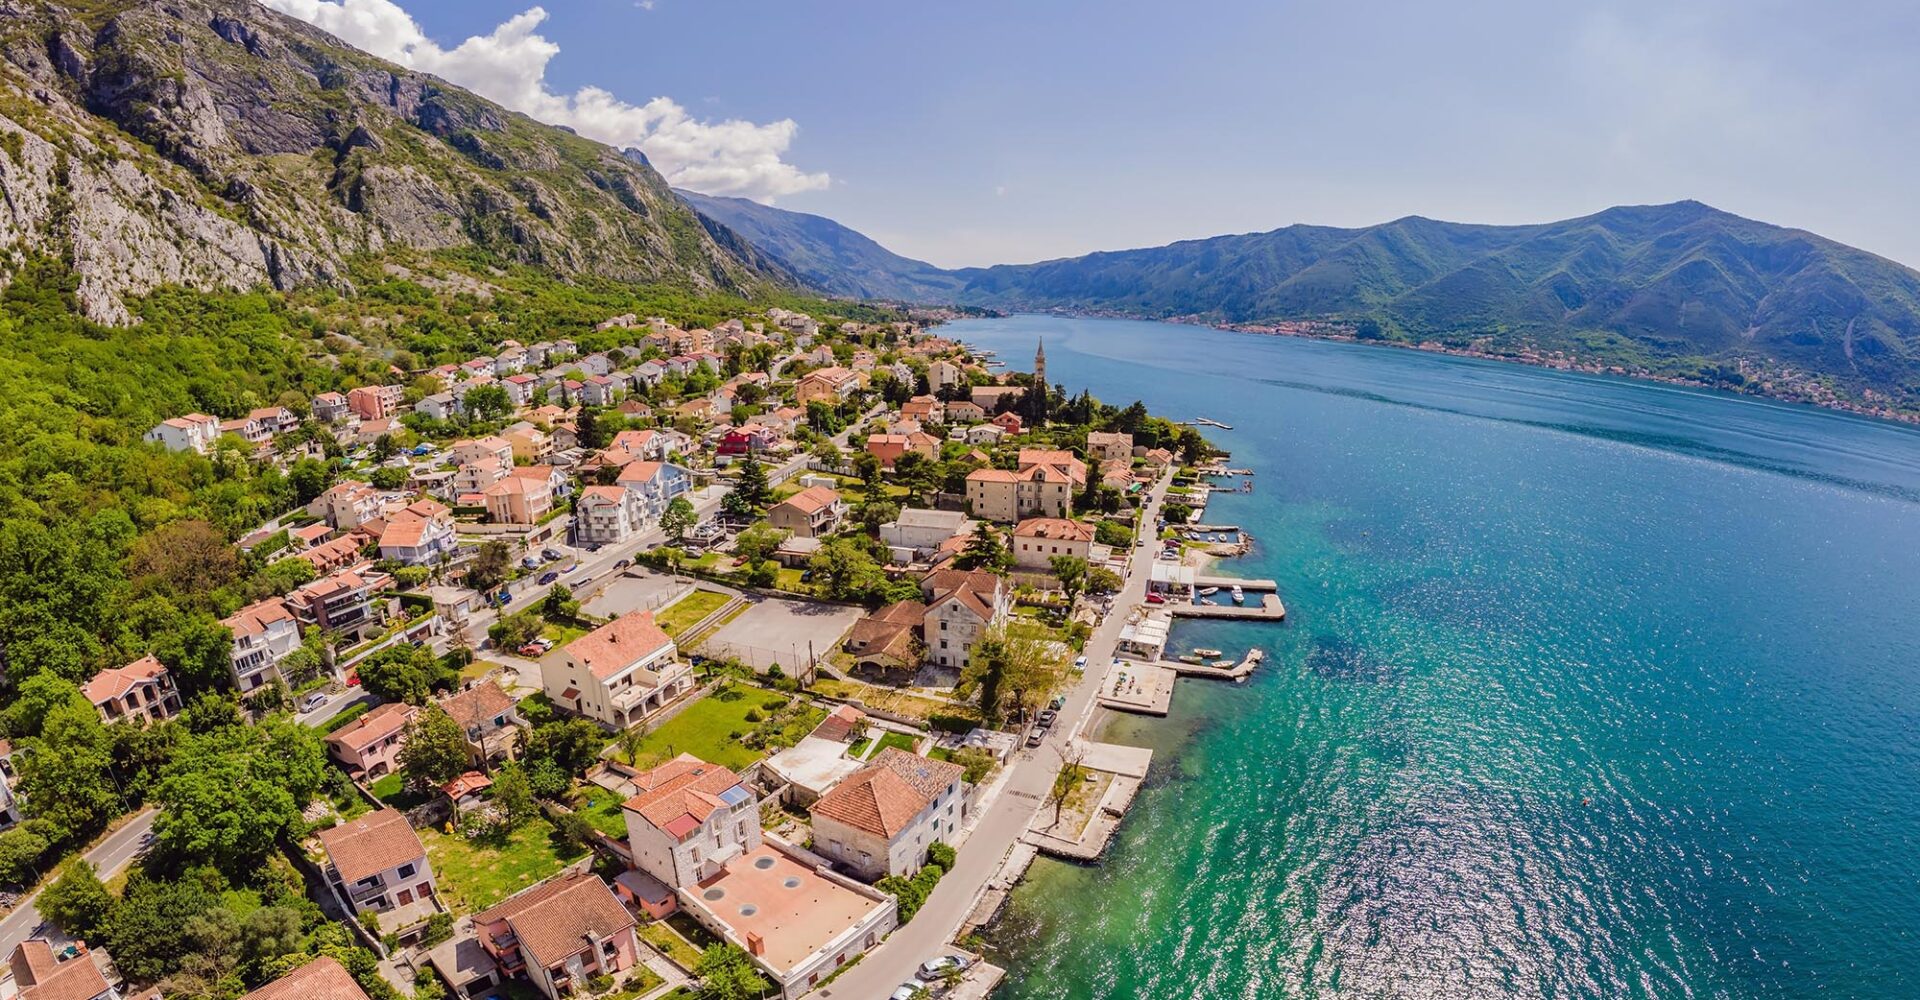 Montenegro. Boka Kotor Gulf. View on the picturesque coastal town of Dobrota, the Institute of Marine Biology and the Church of St. Ilijah